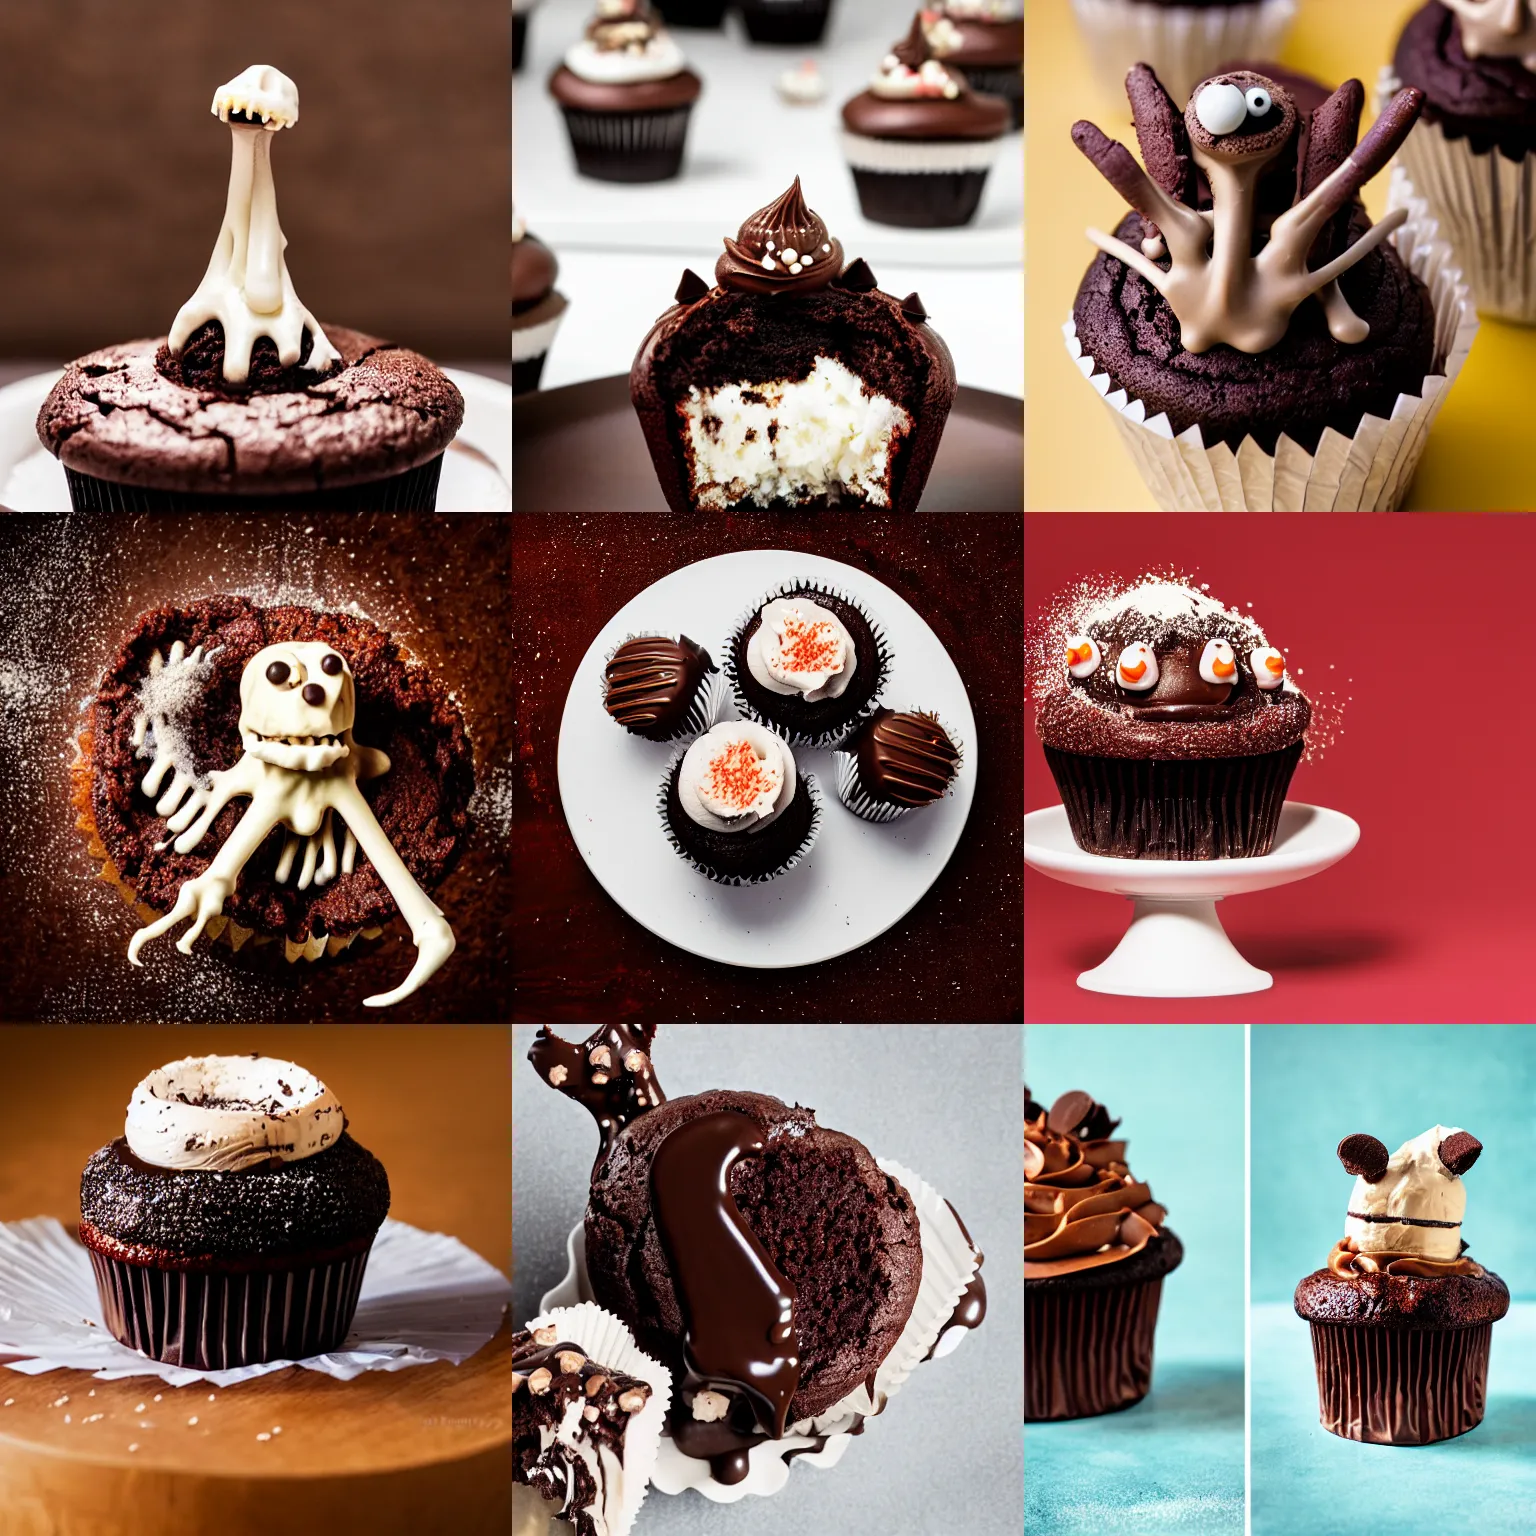 Prompt: a bone creature emerging from an exploding chocolate cupcake, professional food photography